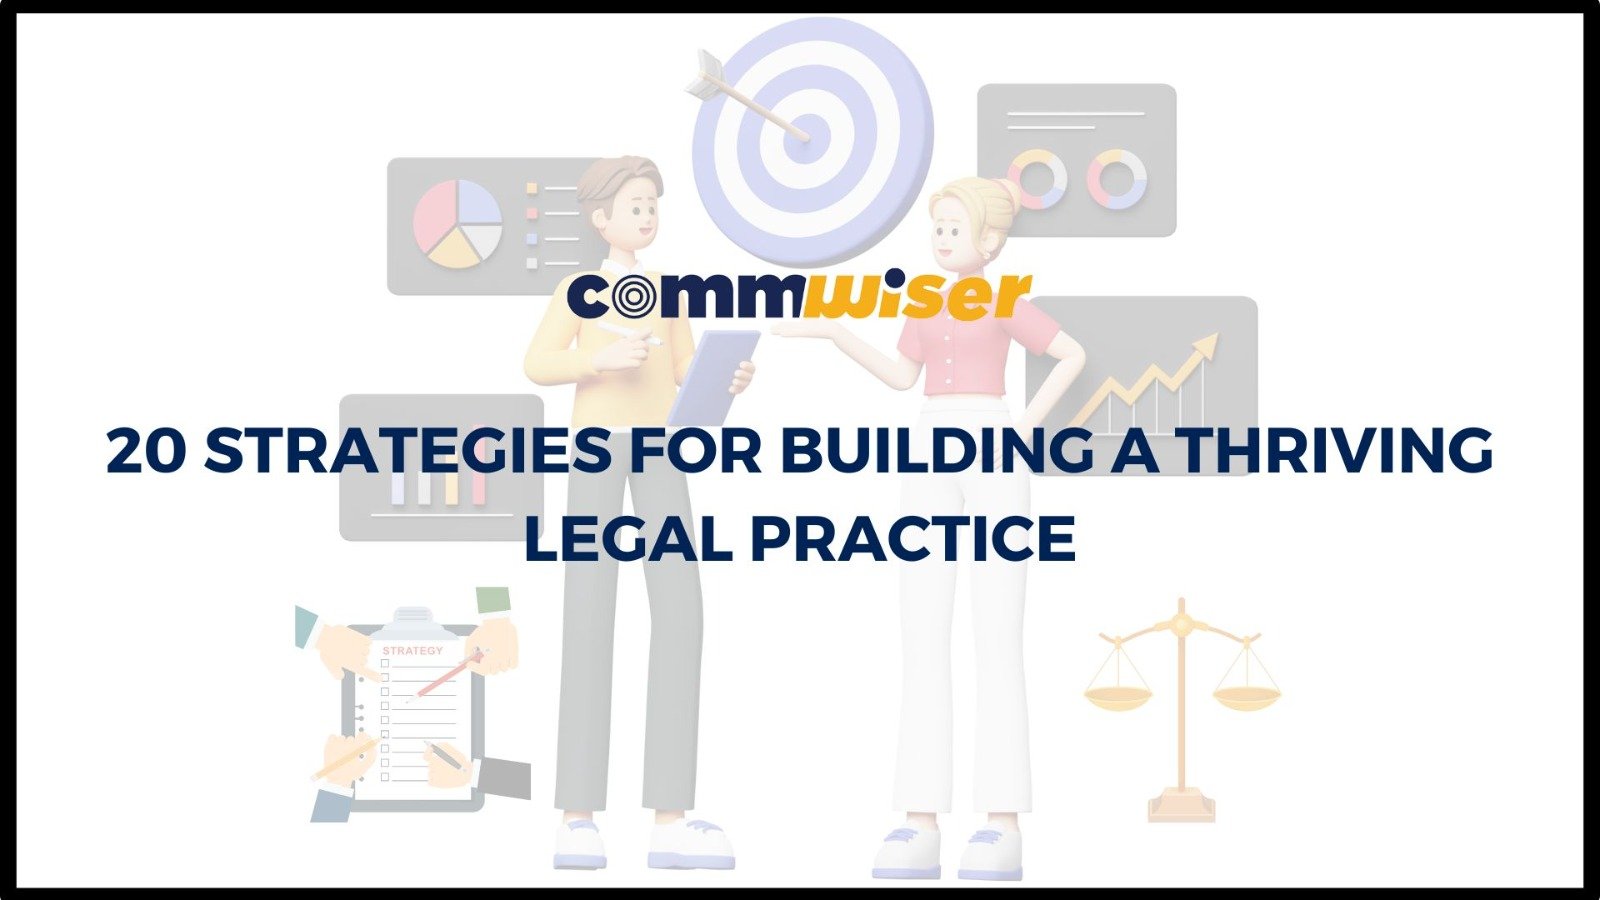 20 STRATEGIES FOR BUILDING A THRIVING LEGAL PRACTICE